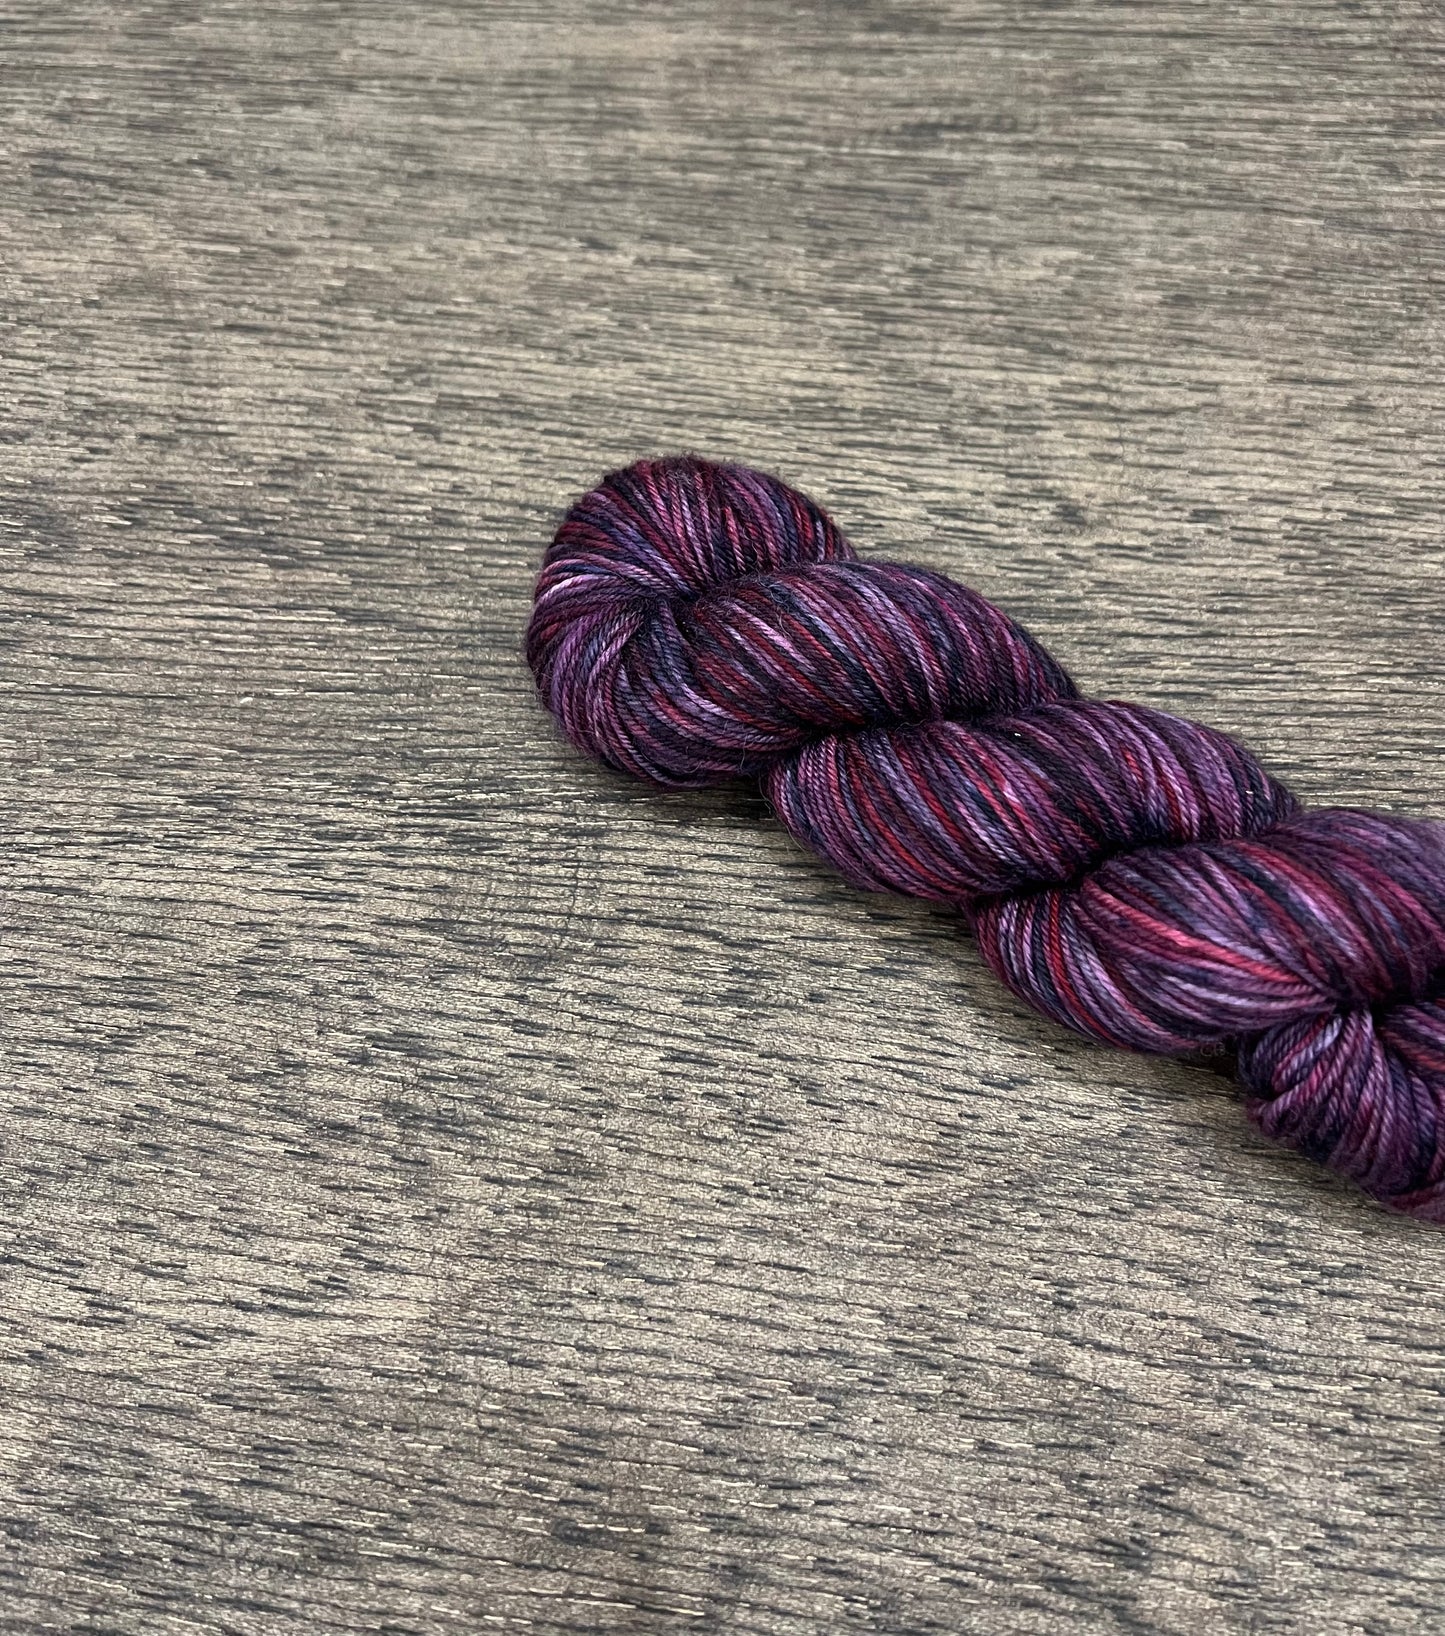 Yarn Club Monthly Yarn Subscription - Discovery of Witches Inspired SEPTEMBER